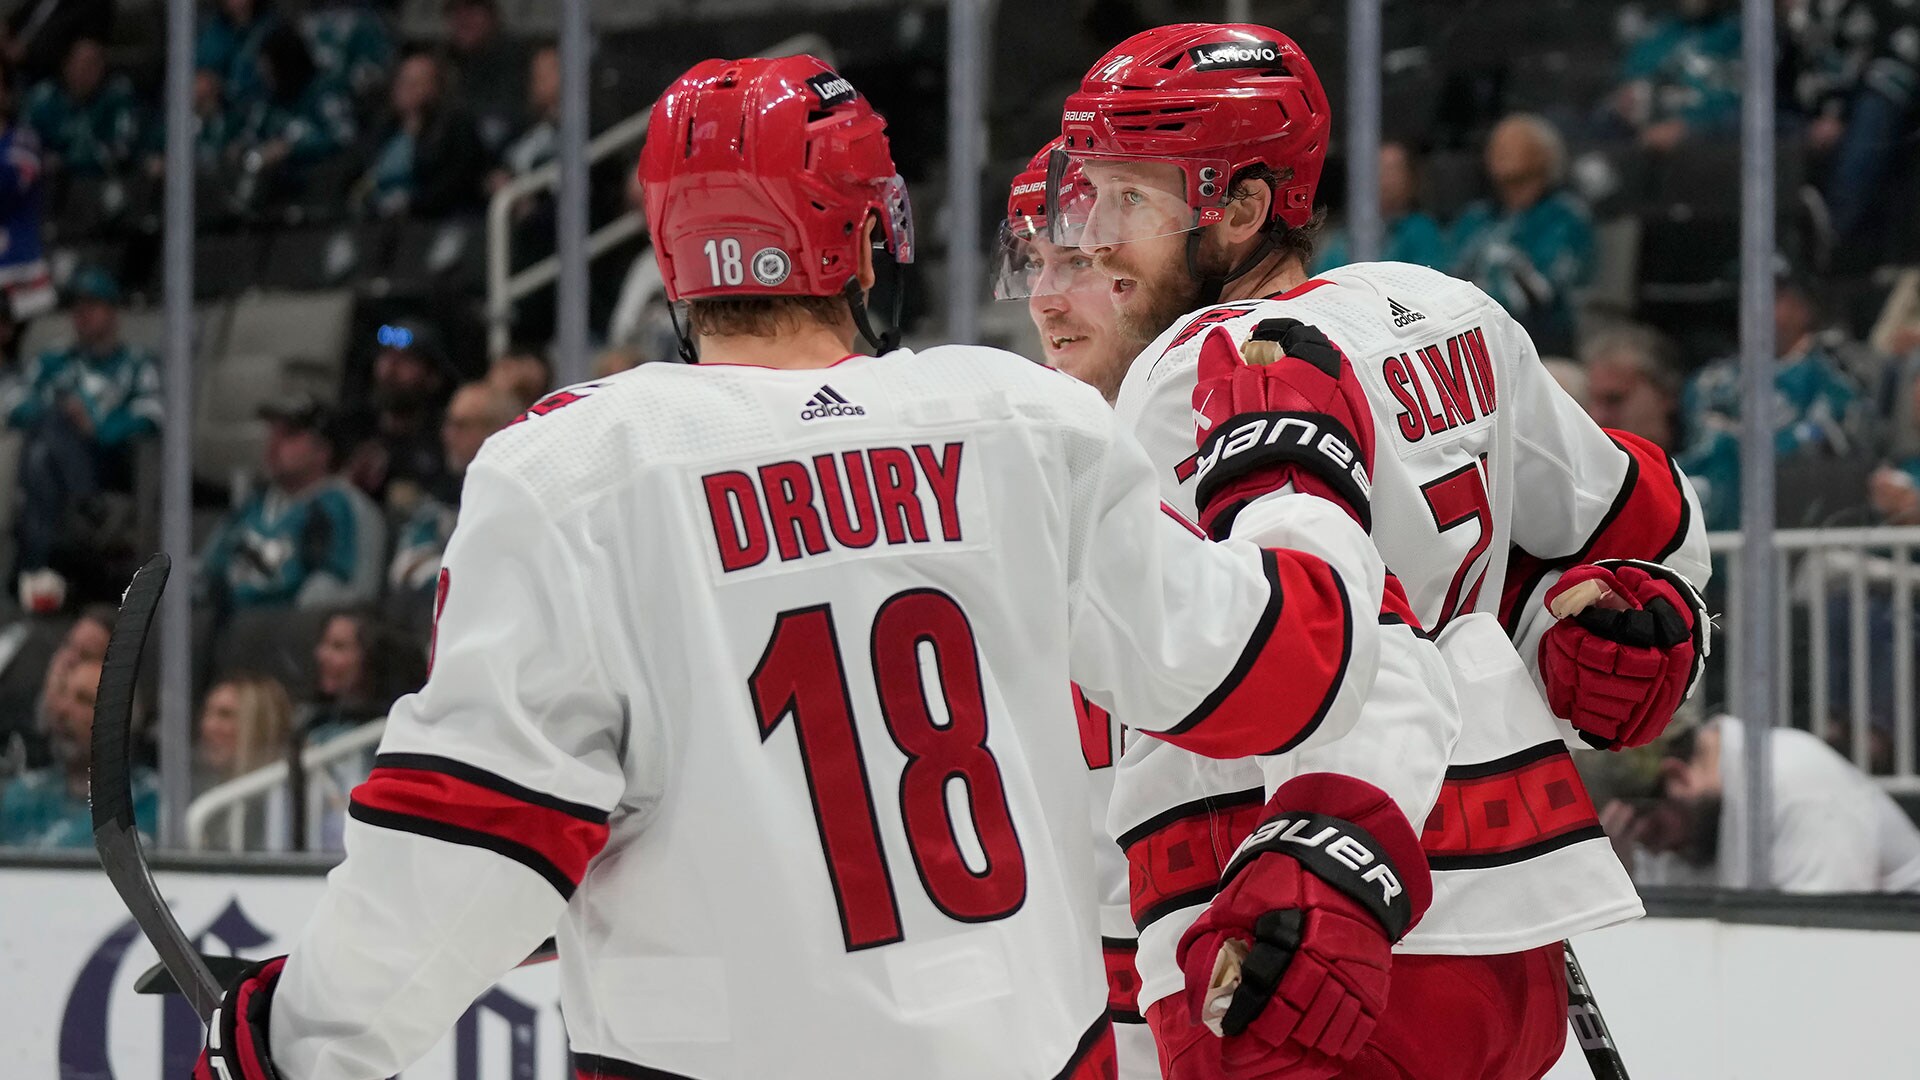 Seth Jarvis scores 2 power-play goals, Hurricanes beat Sharks 6-3, NHL